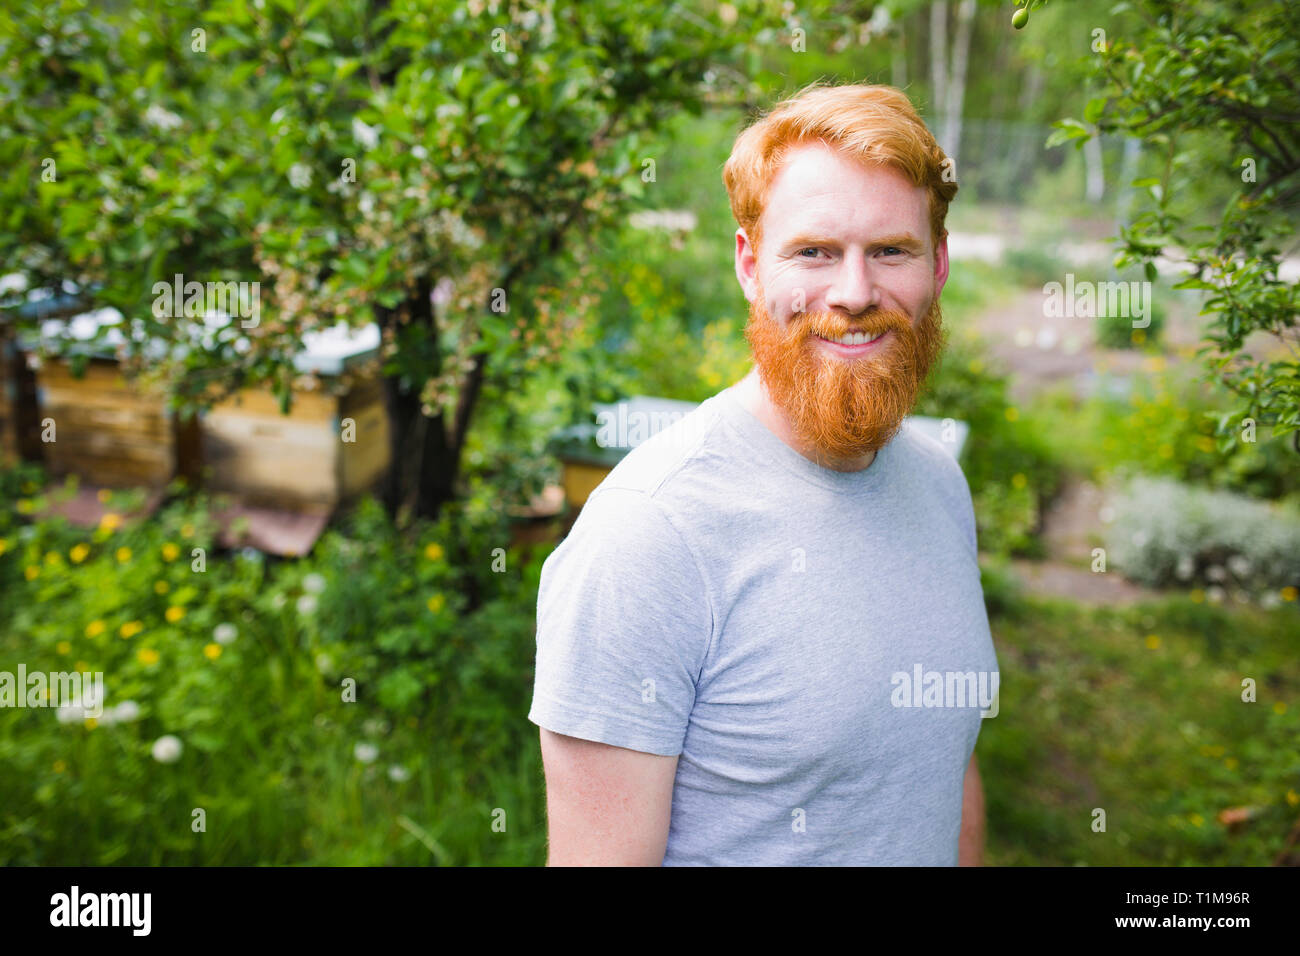 Portrait smiling, confident man with red hair in garden Stock Photo